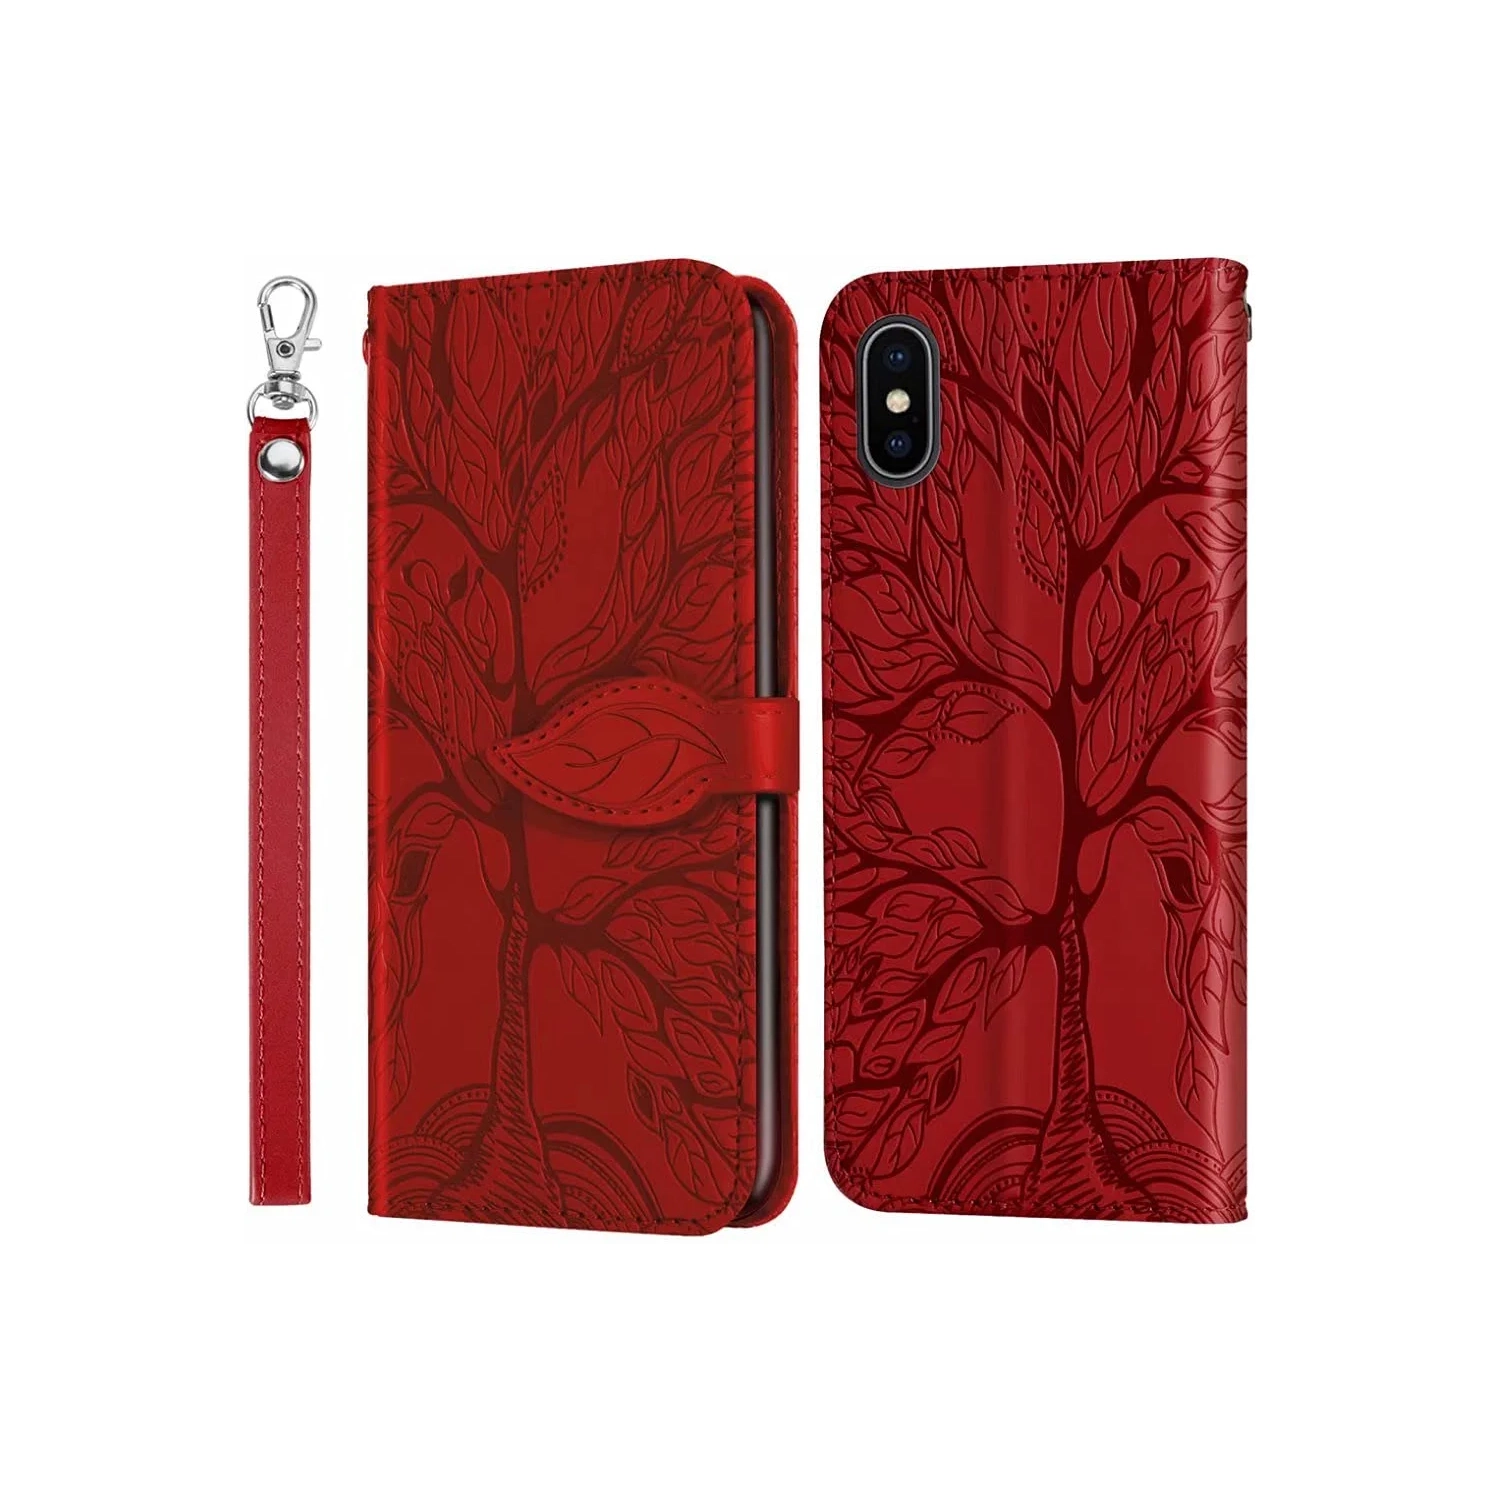 Premium PU Leather Embossed Tree Wallet Case with card slots and wrist strap for iPhone XS Max A1921